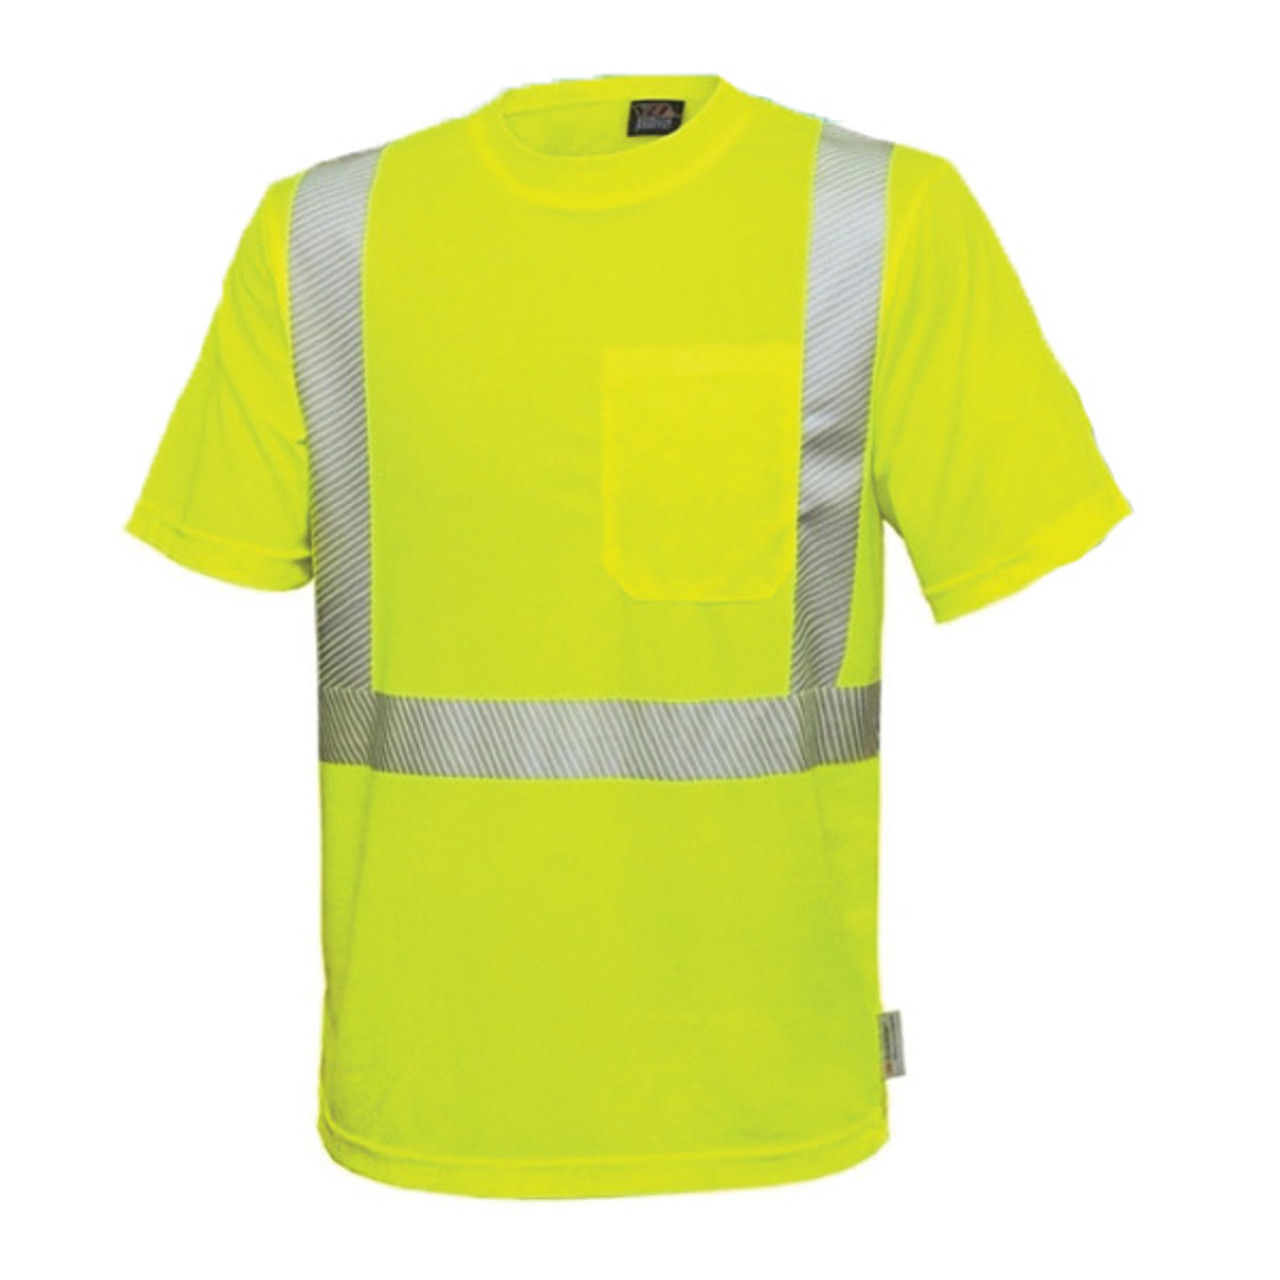 VEA® VEA-102-CT-LM ANSI Class 2 High-Visibility Short Sleeve Safety ...